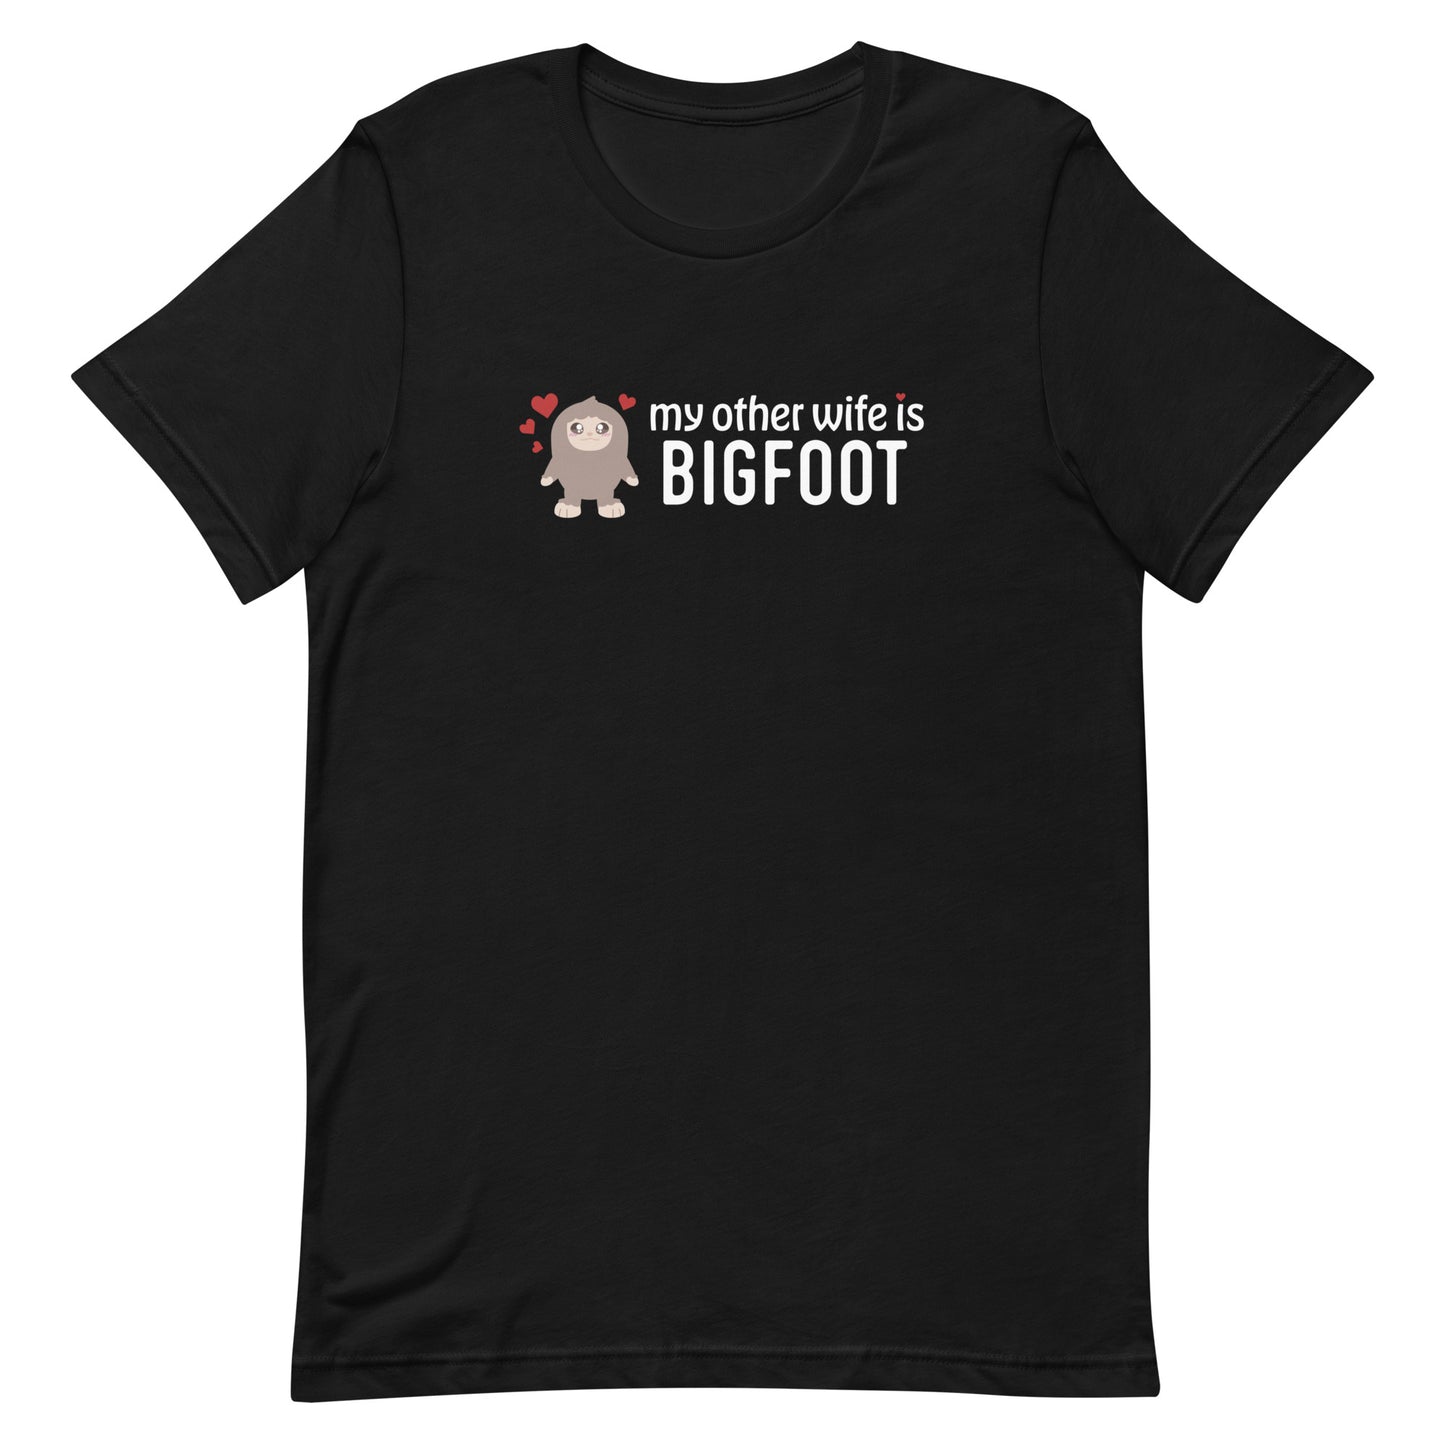 My Other _____ Is Bigfoot T-Shirt